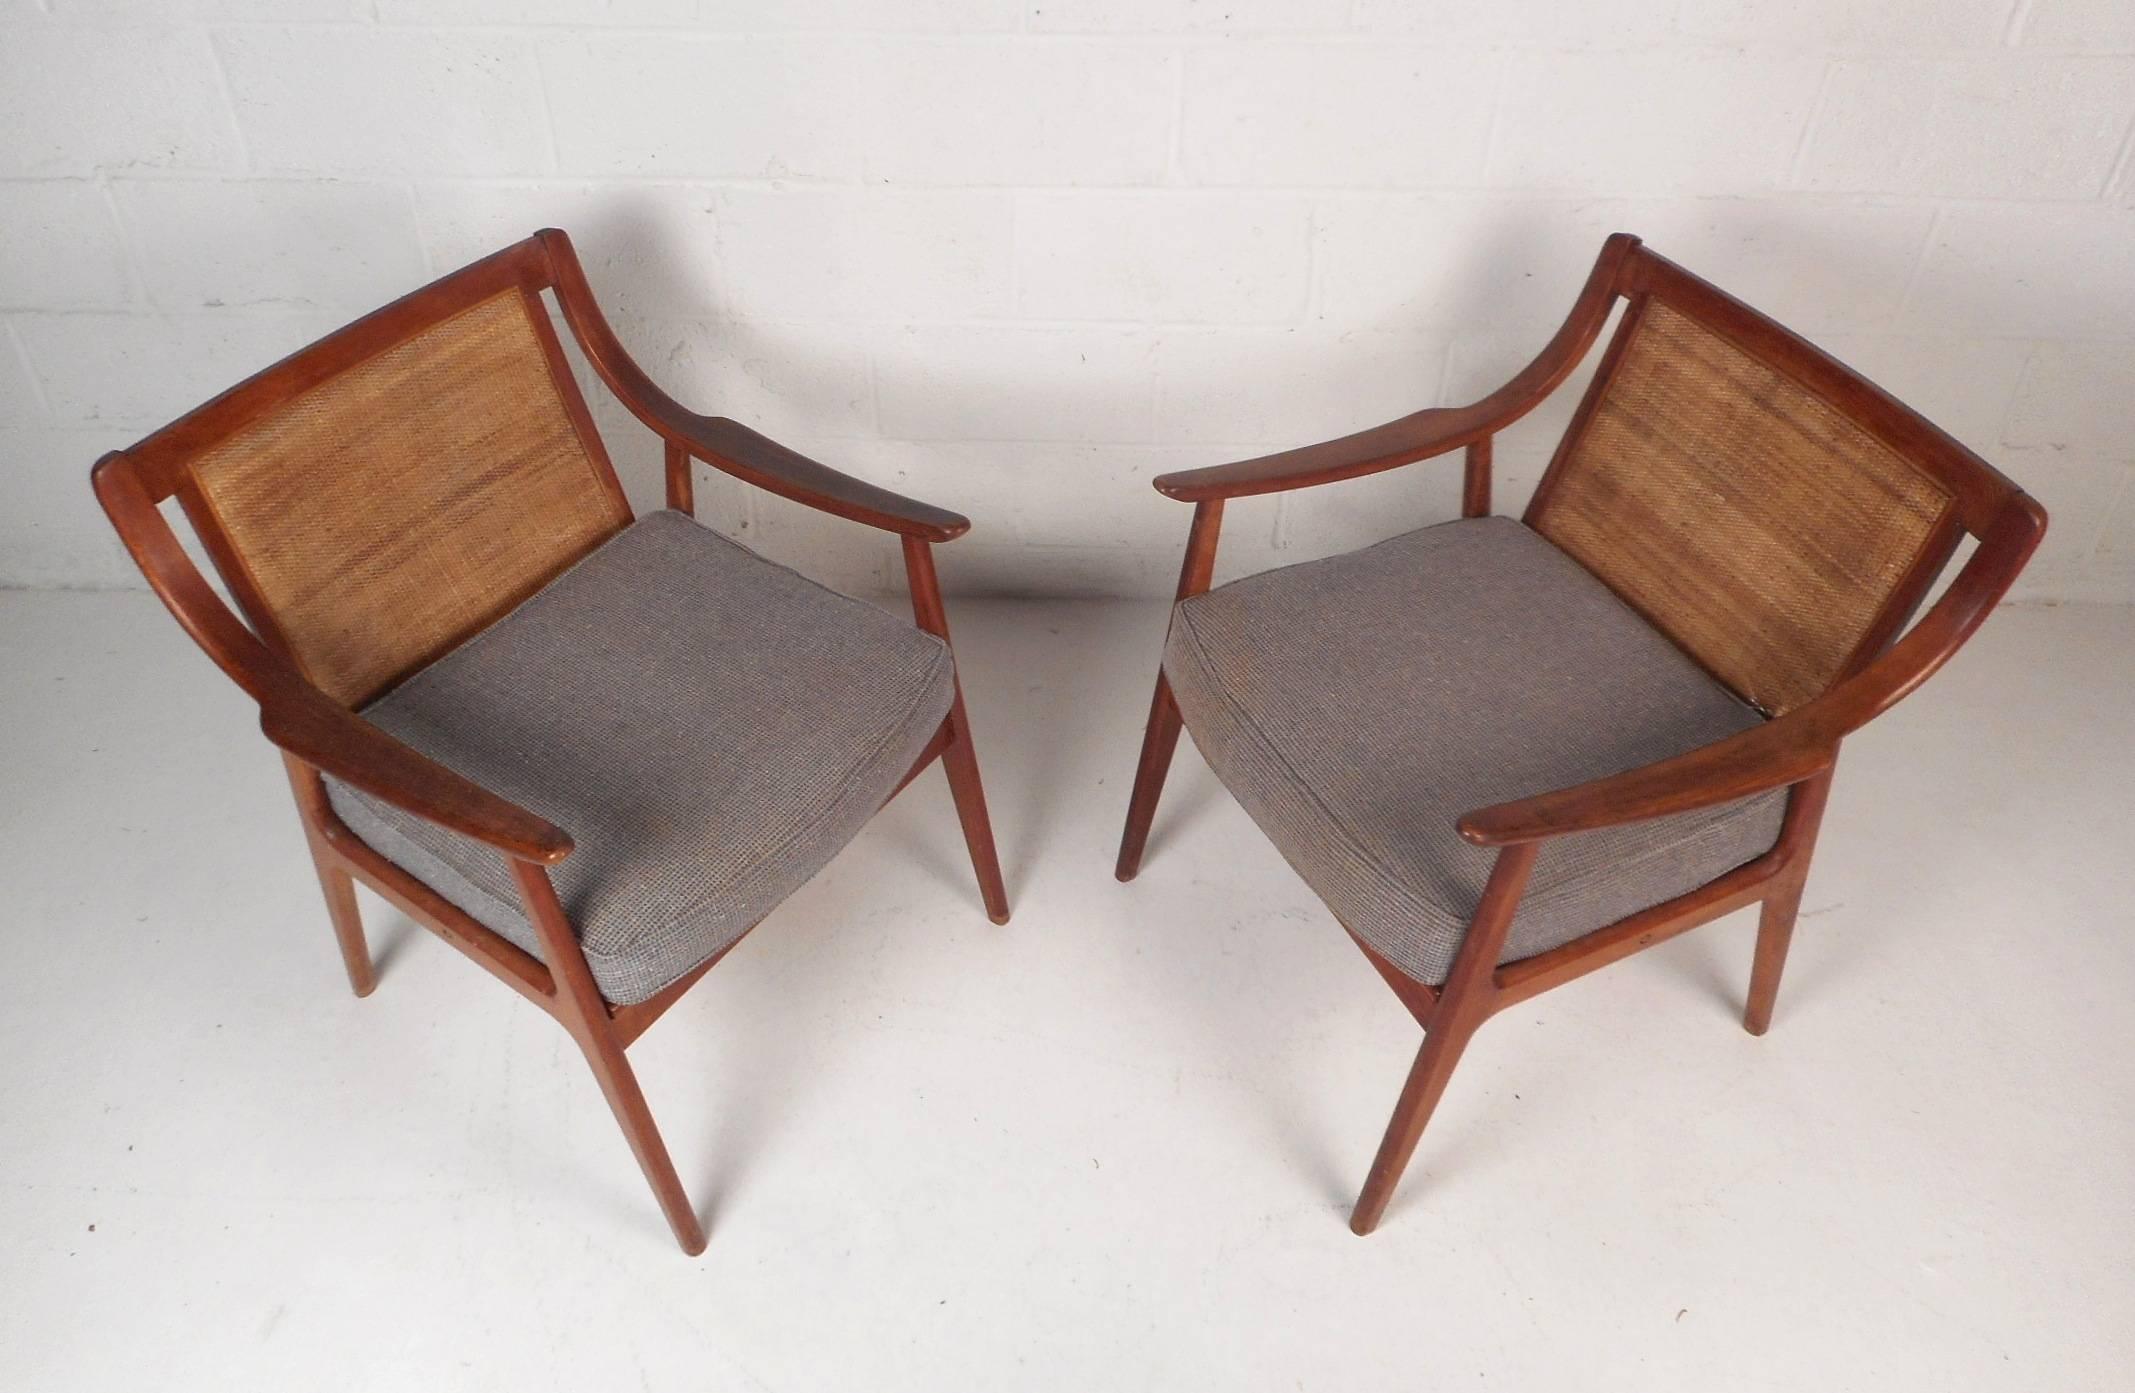 A stunning pair of vintage modern lounge chairs with cane back rests and a removable cushion. This Danish style pair feature sloping arm rests, a woven cane back rest, and angled legs. Sturdy walnut frames and a thick upholstered cushions show